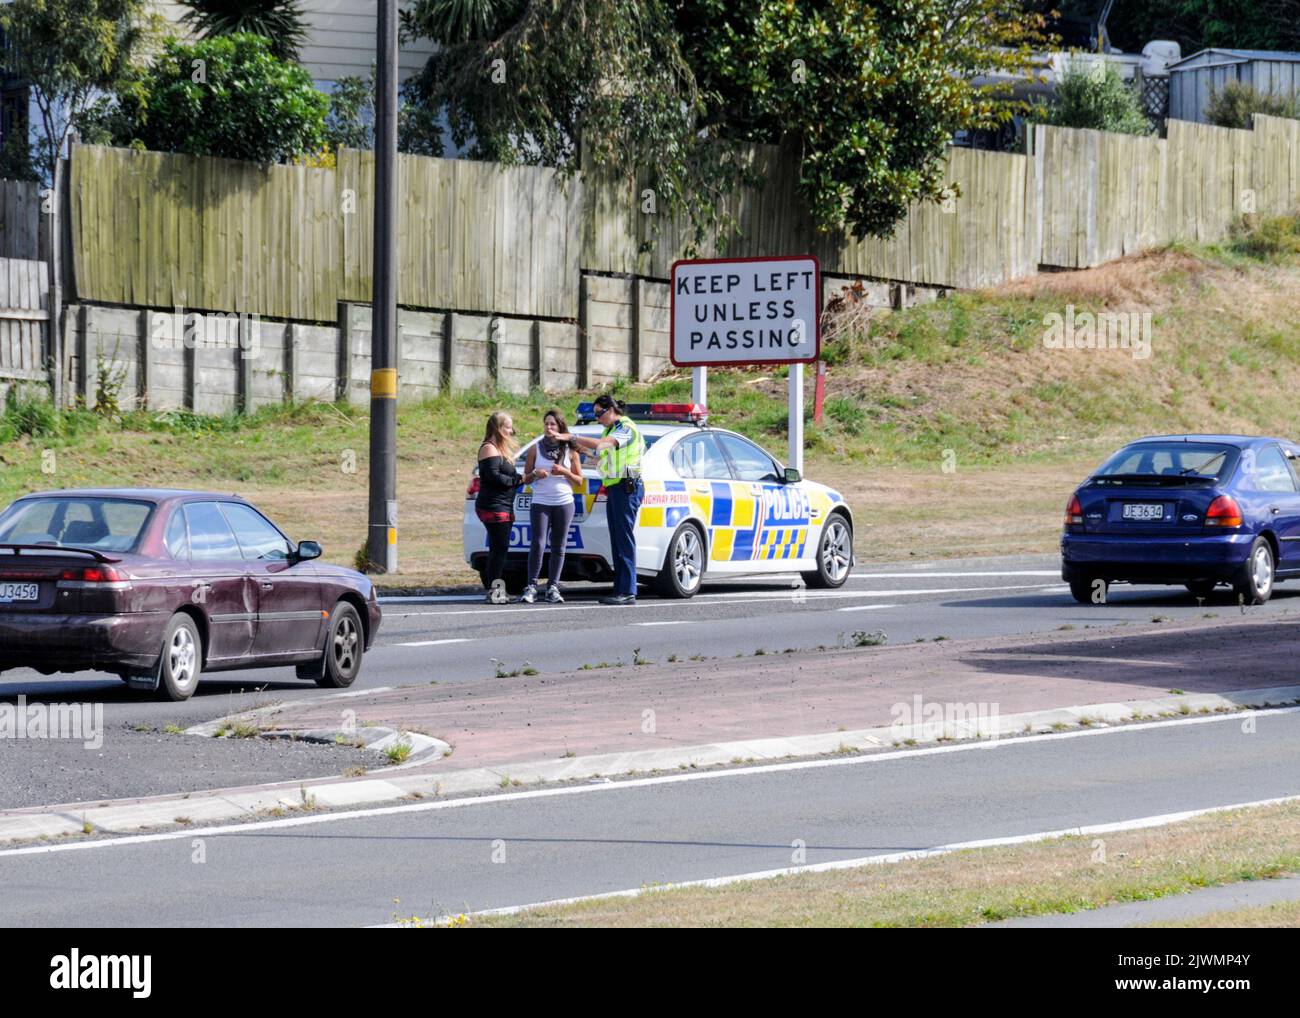 A passing police patrol car takes care of the two young girl tourists who were hitch-hiking on a busy main road in Taupo near the centre of New Zealand Stock Photo